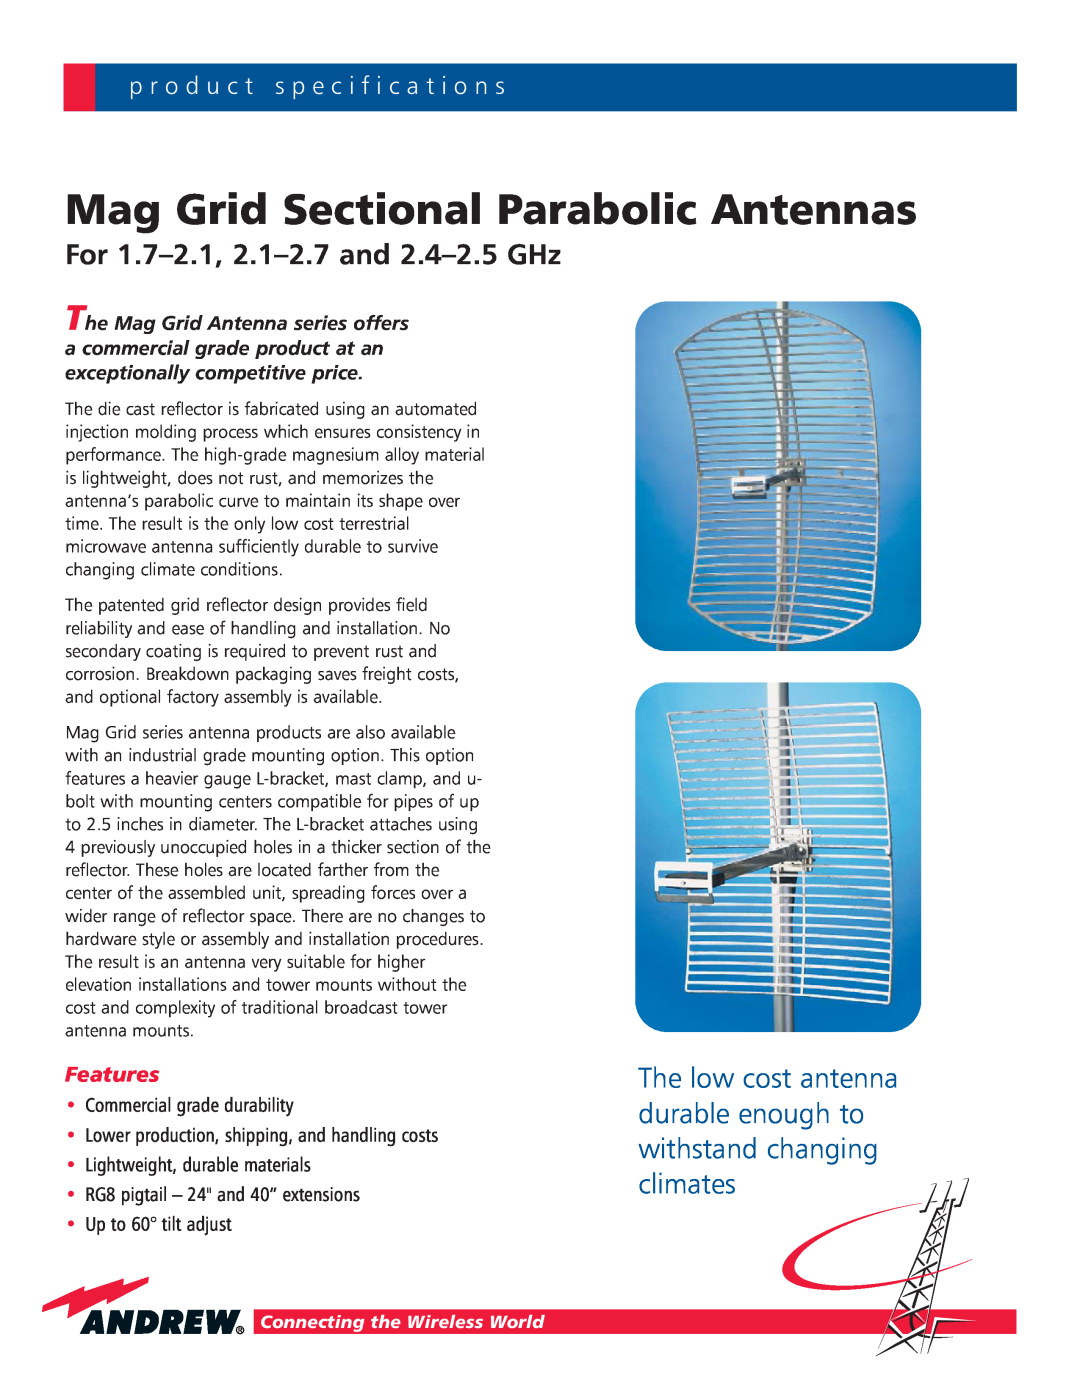 Andrew Grid Sectional Parabolic Antennas specifications p r o d u c t s p e c i f i c a t i o n s, Features 